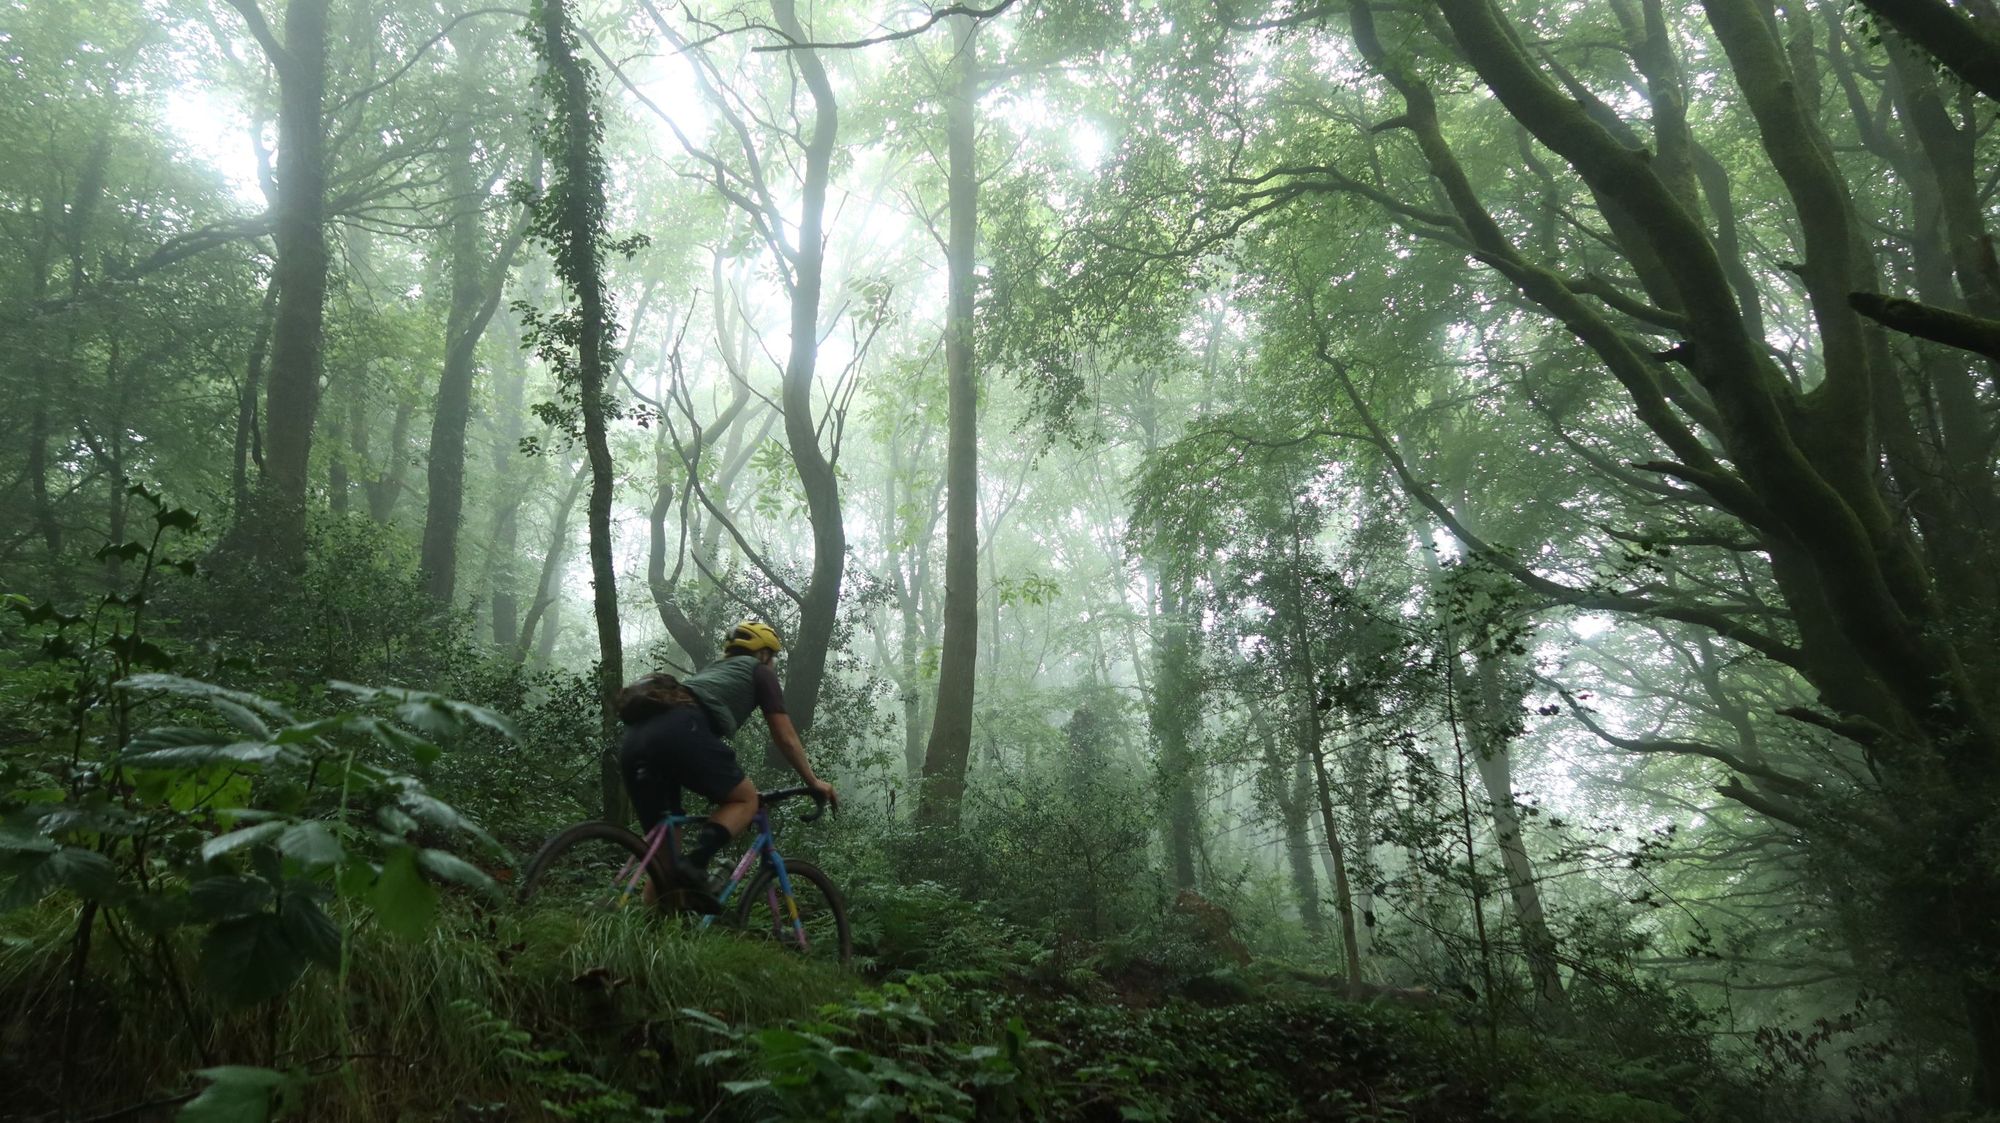 A gravel cyclist rides through the British forests, which seem to be more like exotic rainforests.